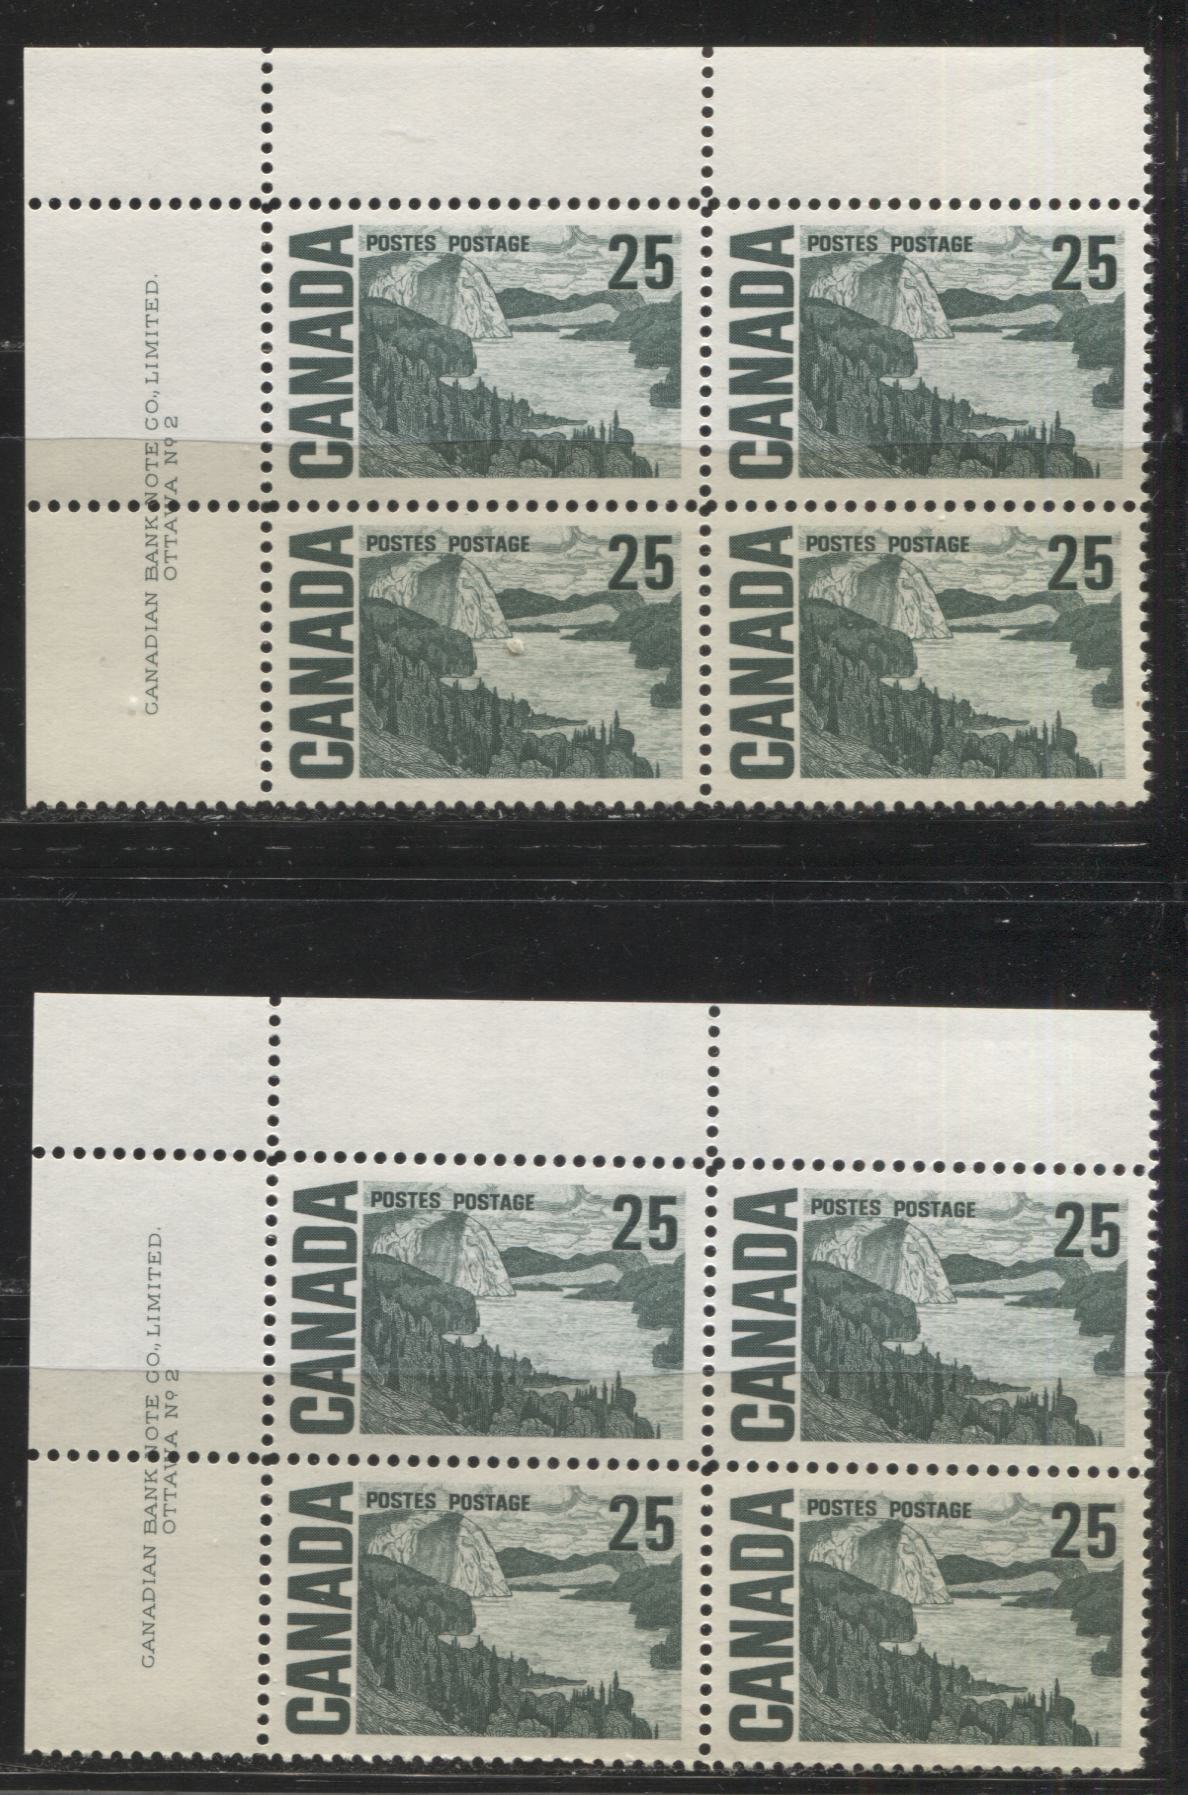 Lot 13 Canada #465 25c Bluish Slate Green Solemn Land, 1967-1973 Centennial Definitive Issue, Two VFNH UL Plate 2 Blocks of 4 On DF Grayish And Grayish White Horizontal And Vertical Wove Papers With Streaky And Smooth Dex Gum